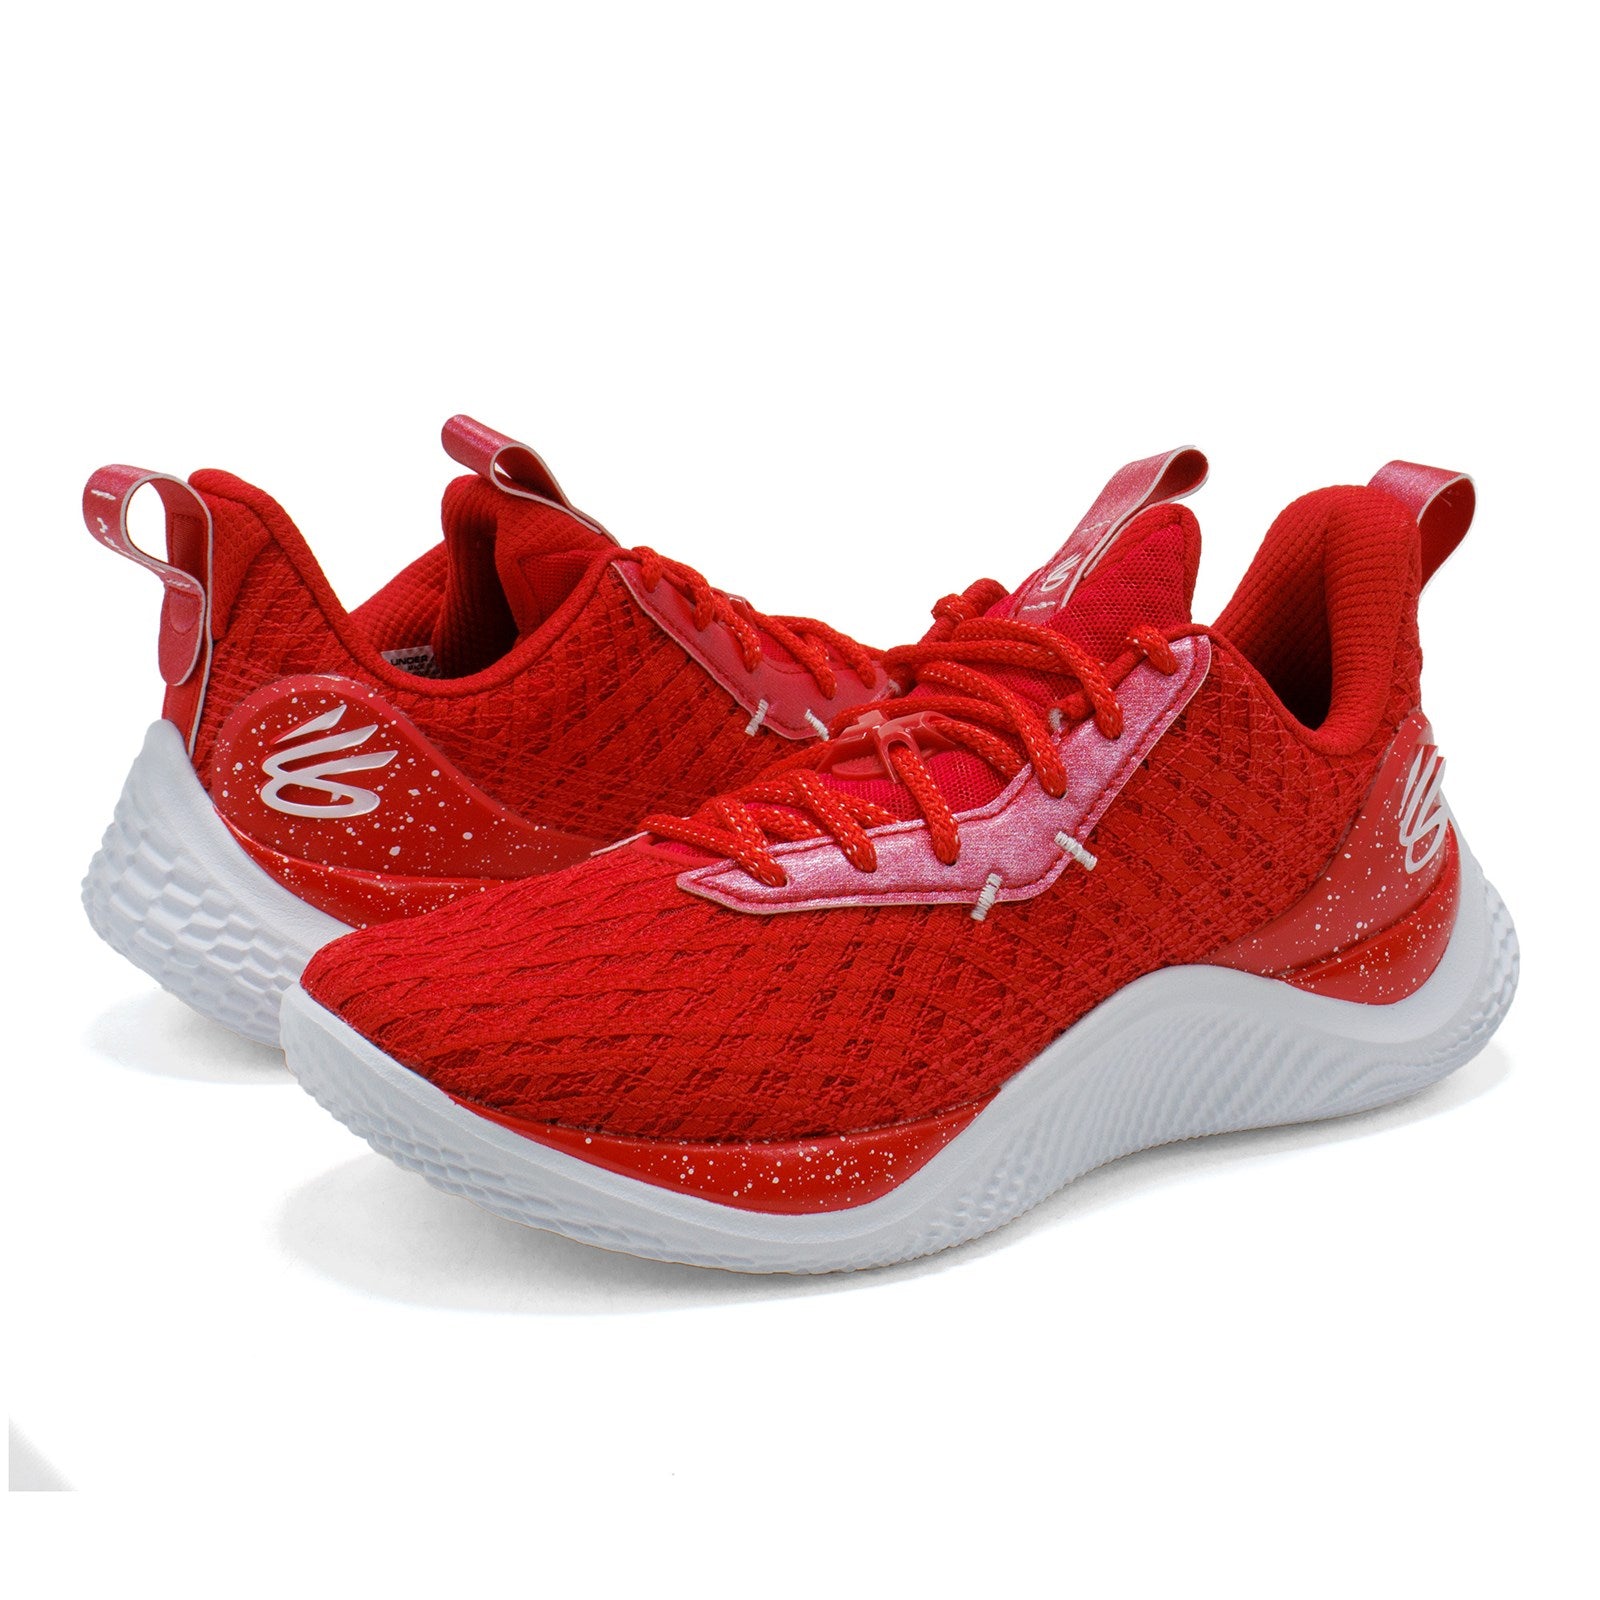 Under Armour Men Team Curry 10 Basketball Shoes